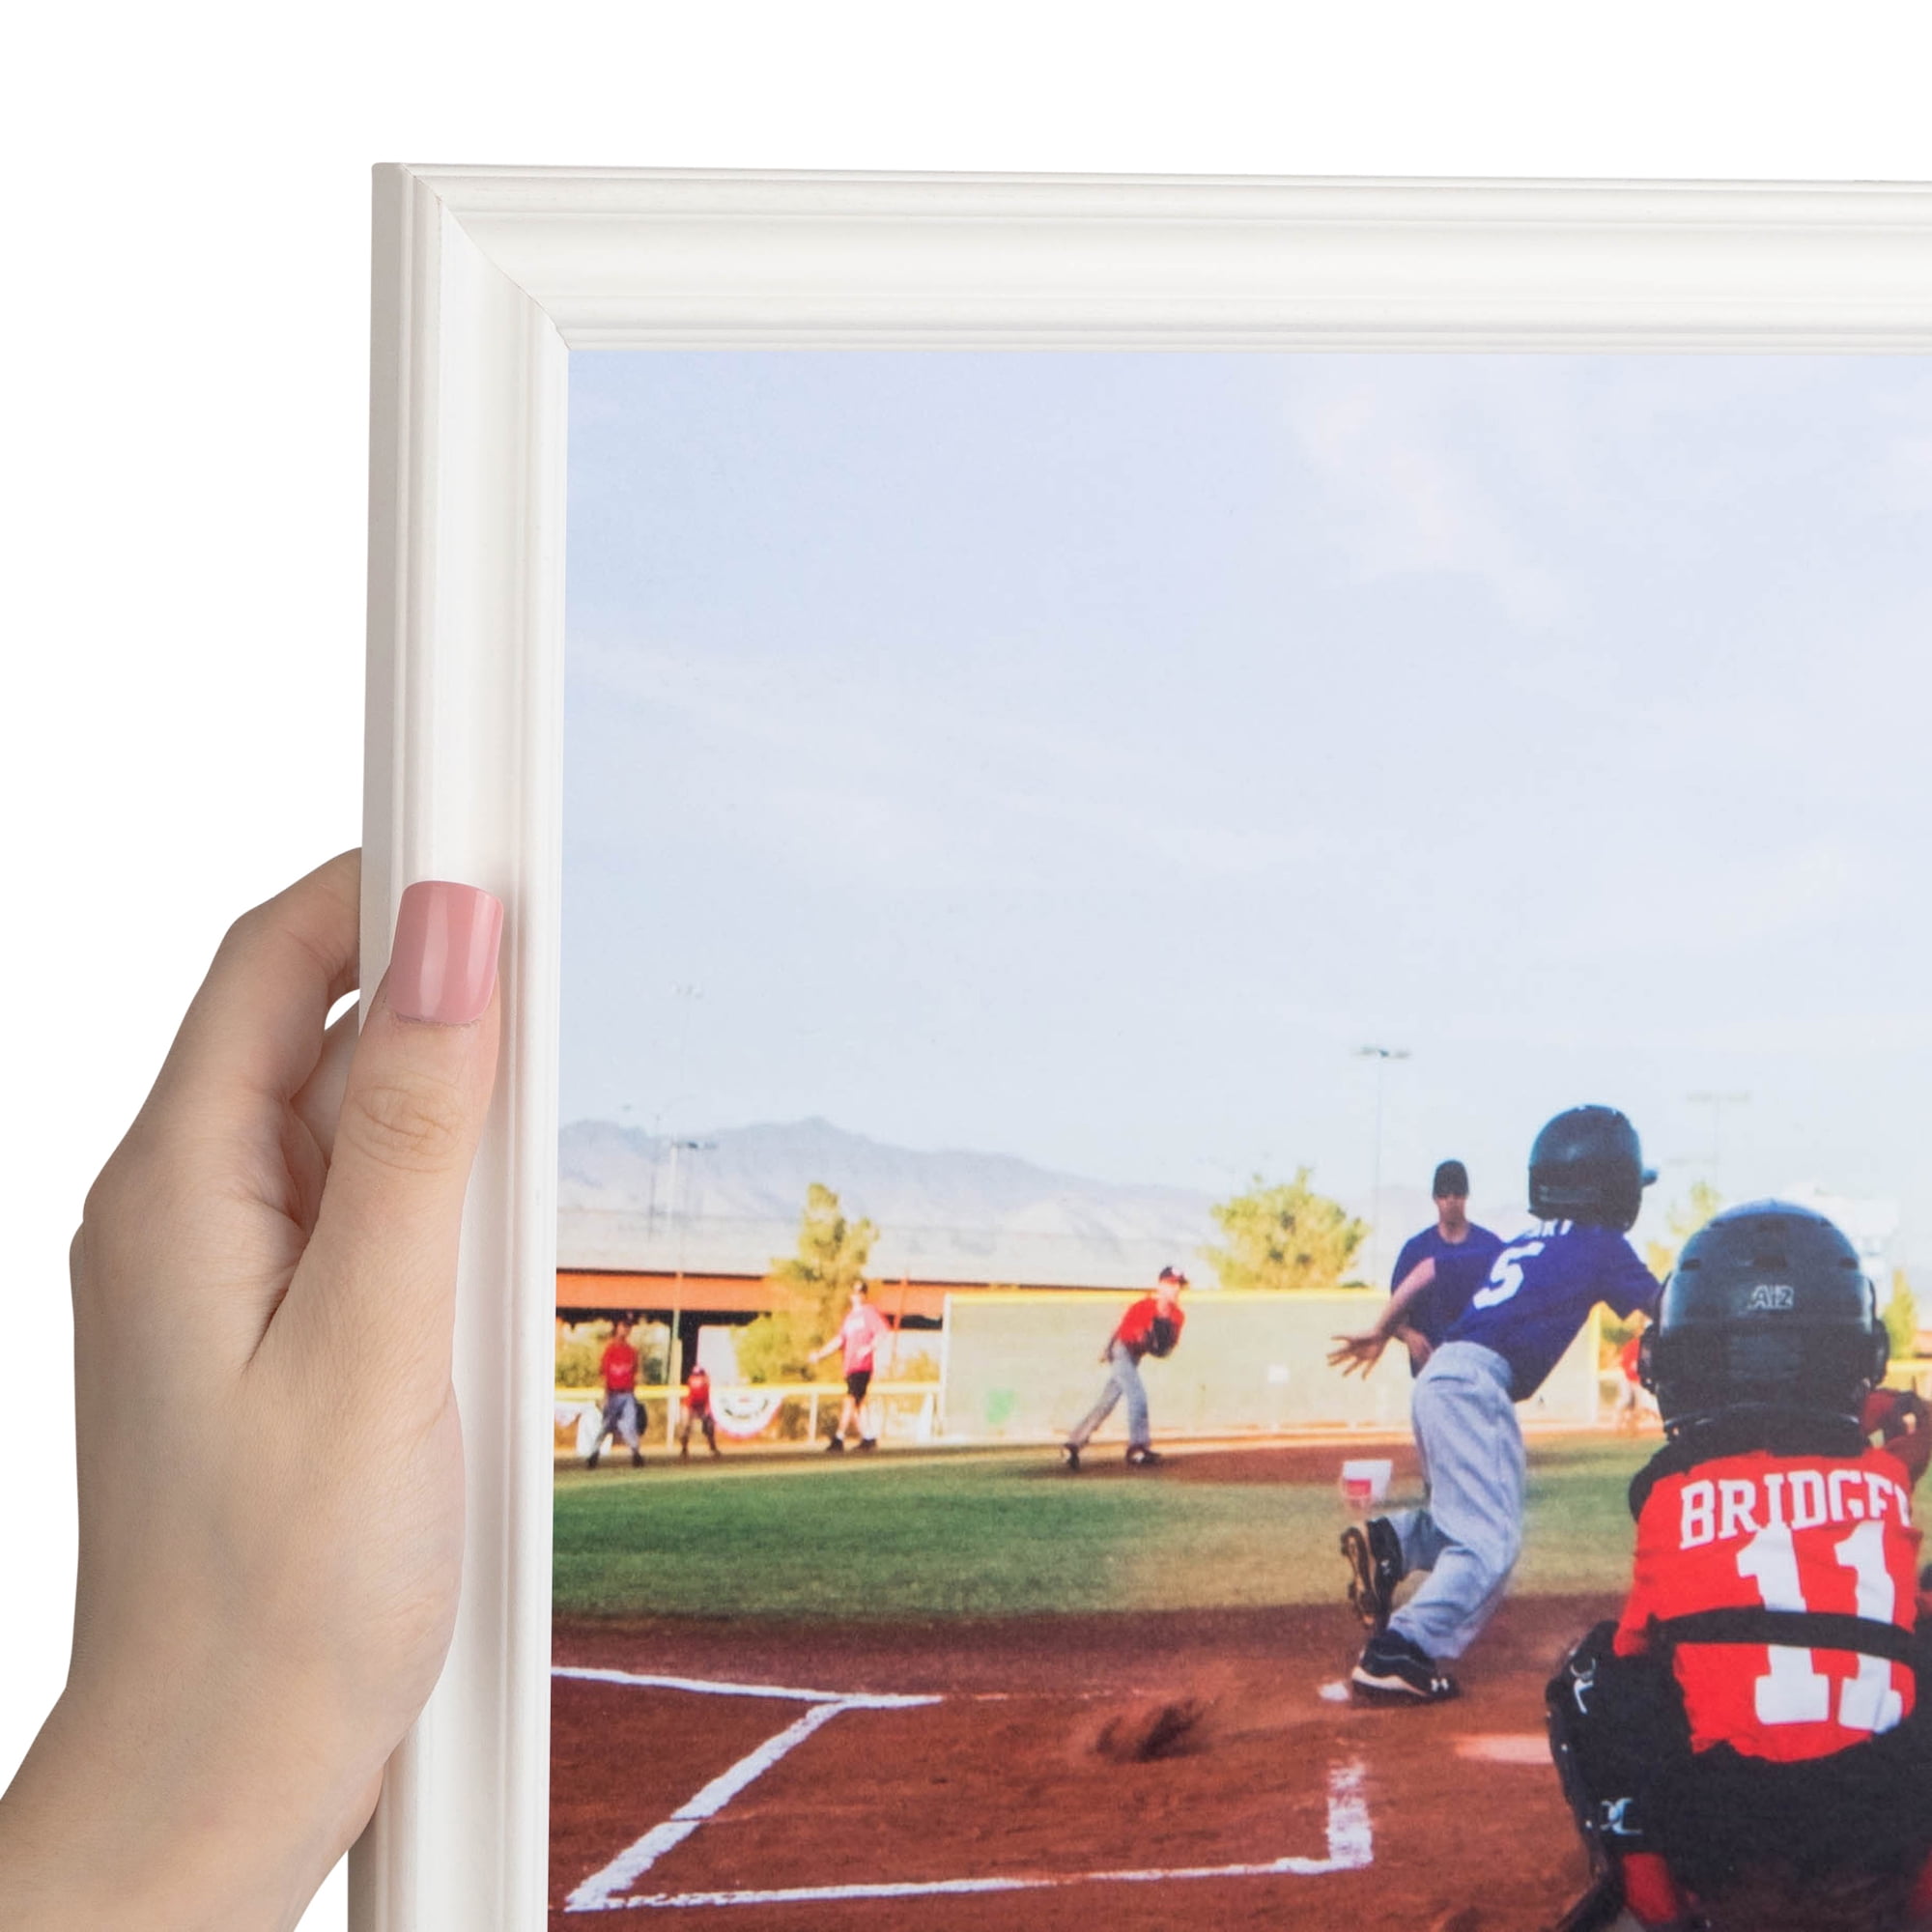 ArtToFrames 4x10 inch Contrast Grey Picture Frame, Gray Wood Poster Frame  (4930)